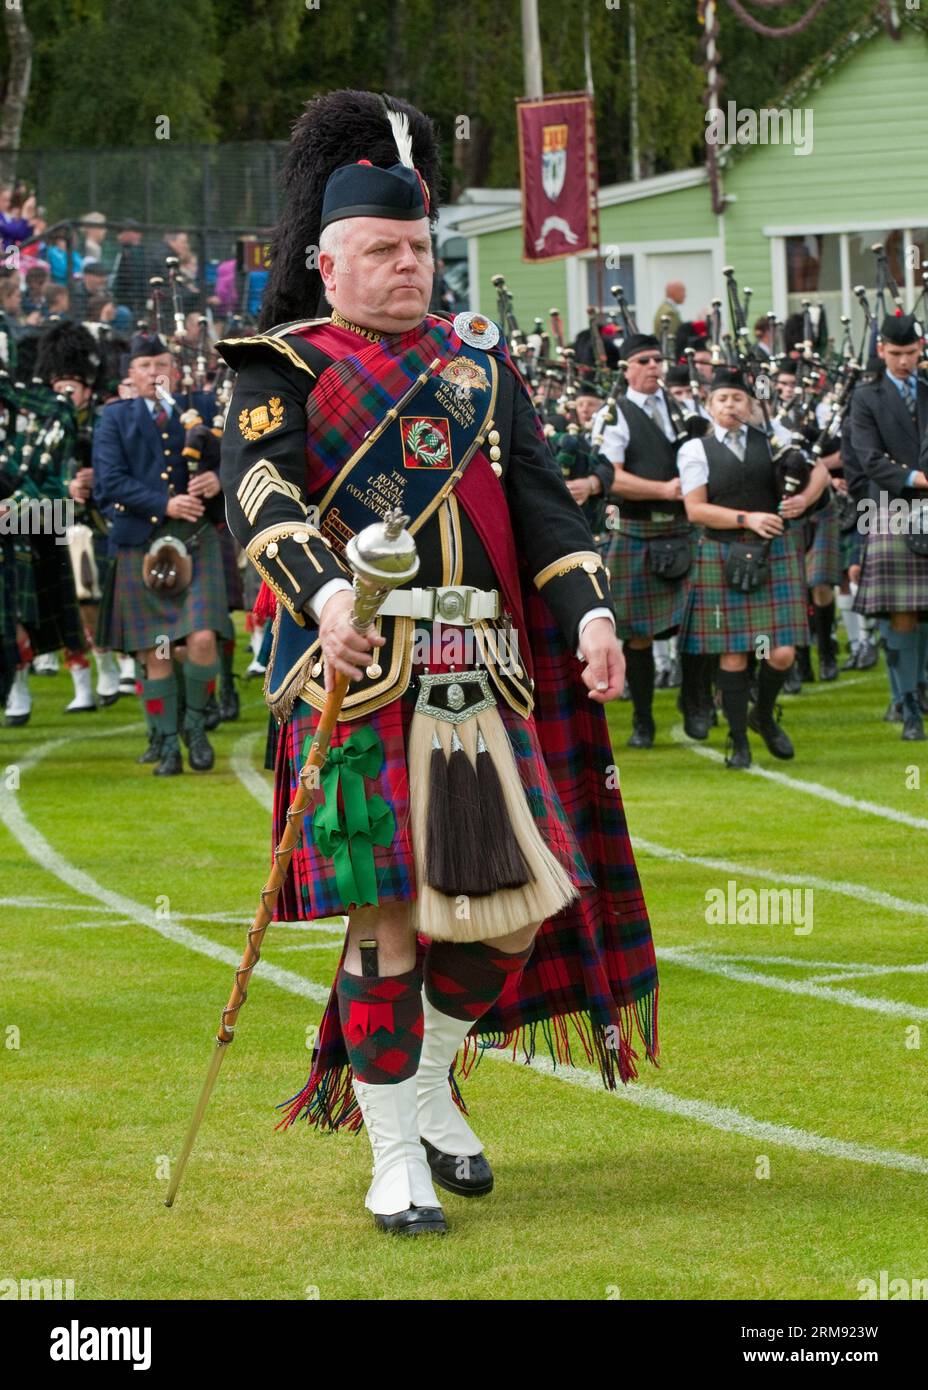 Scottish Massed Pipe Bands playing at the 